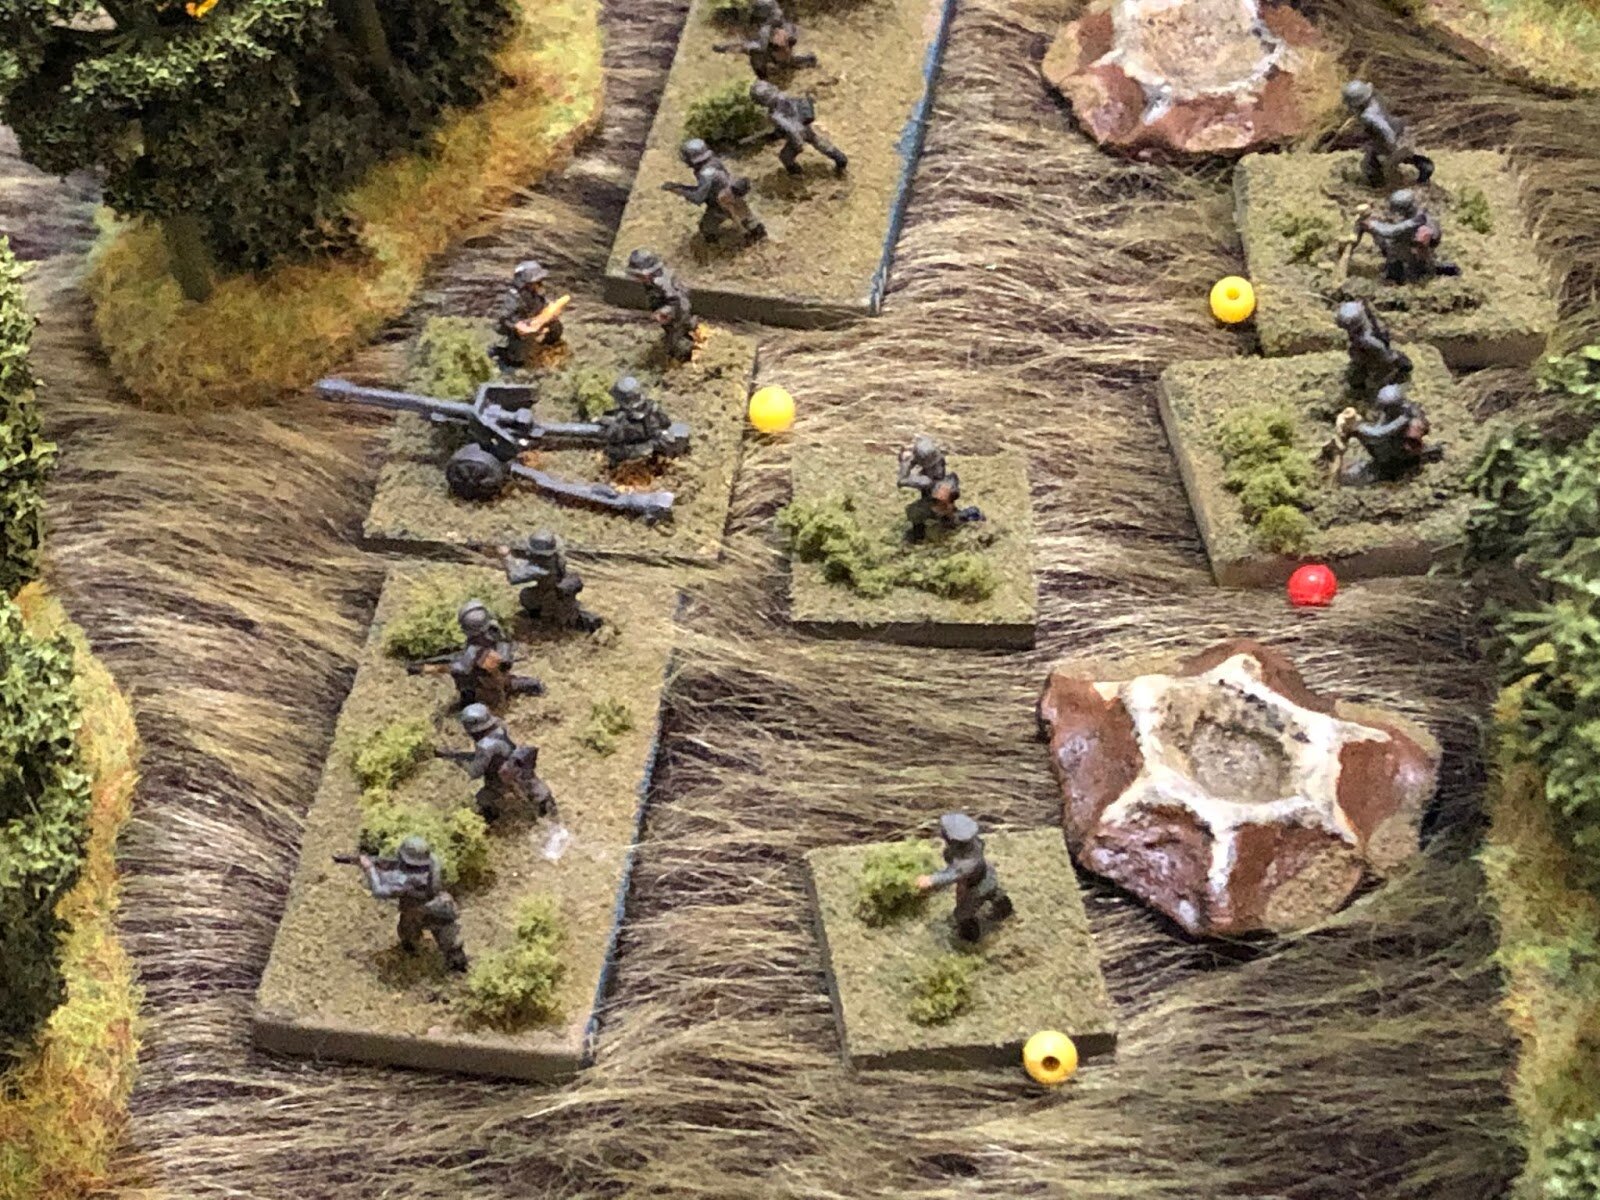  The German Wpns Plt commander (center) rallies his remaining ATG crew (though maybe they didn't need it, they just knocked out a T-34, despite being pinned)... 